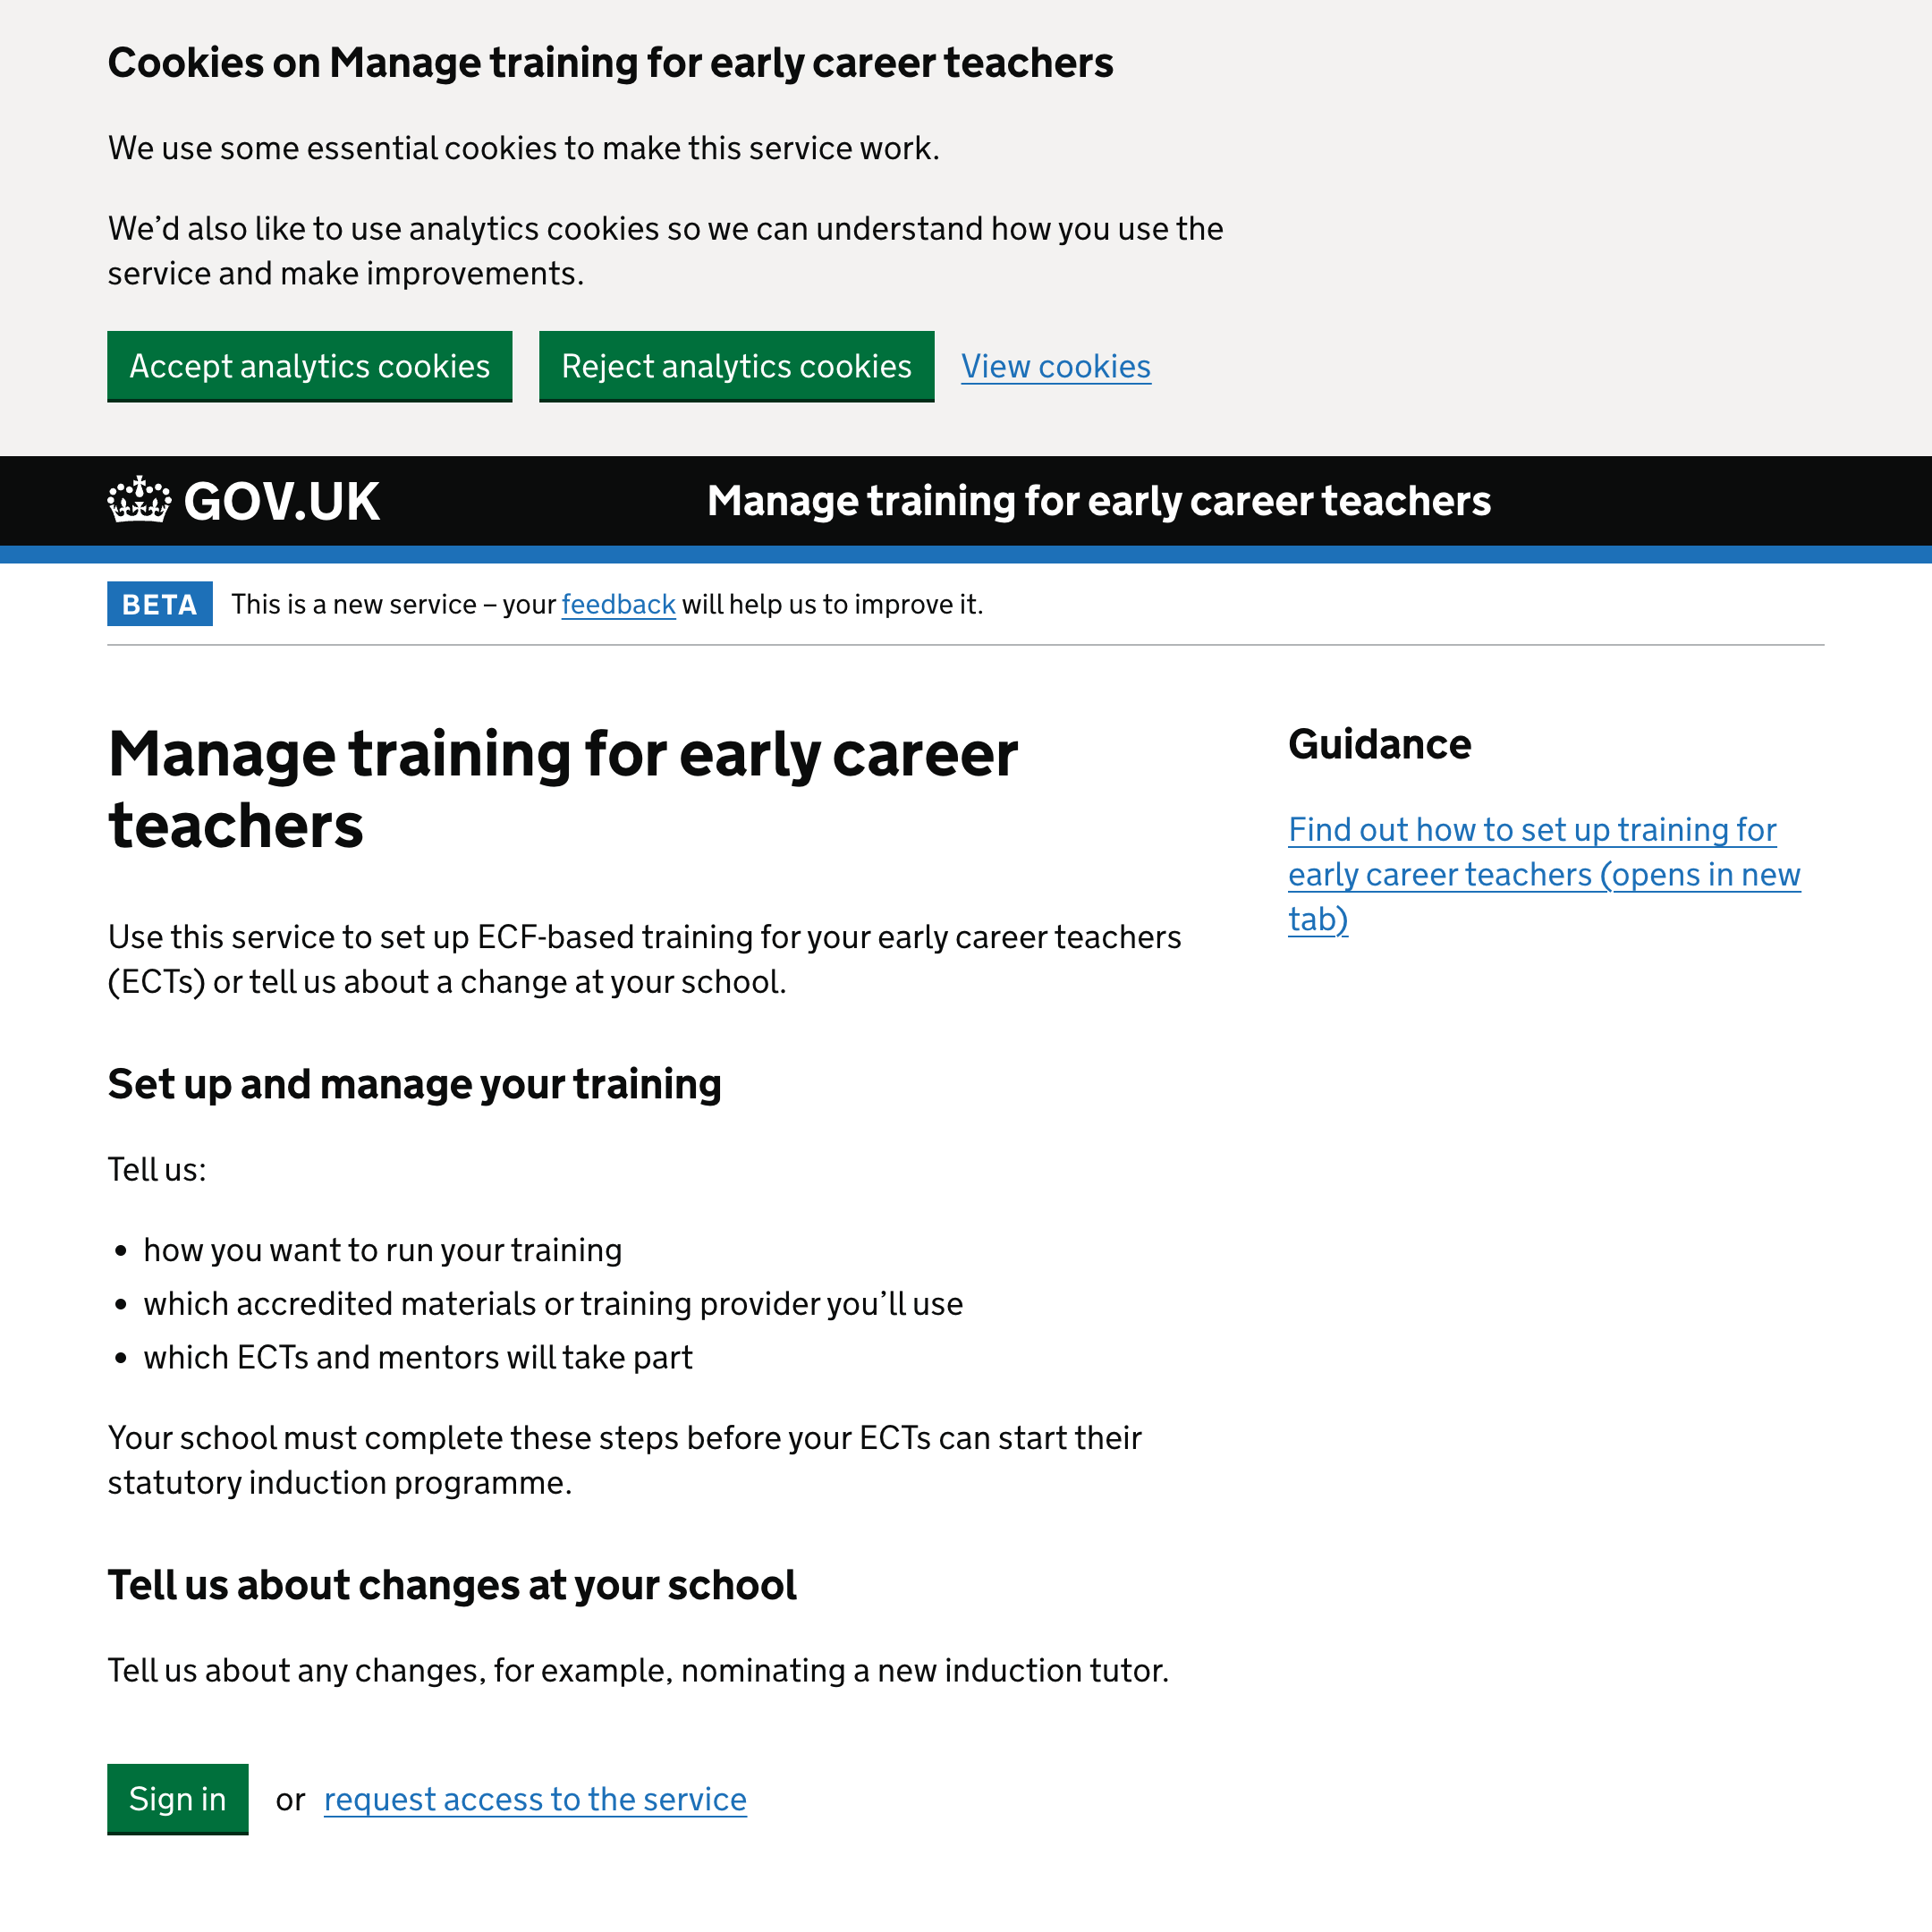 Manage training for early career teachers